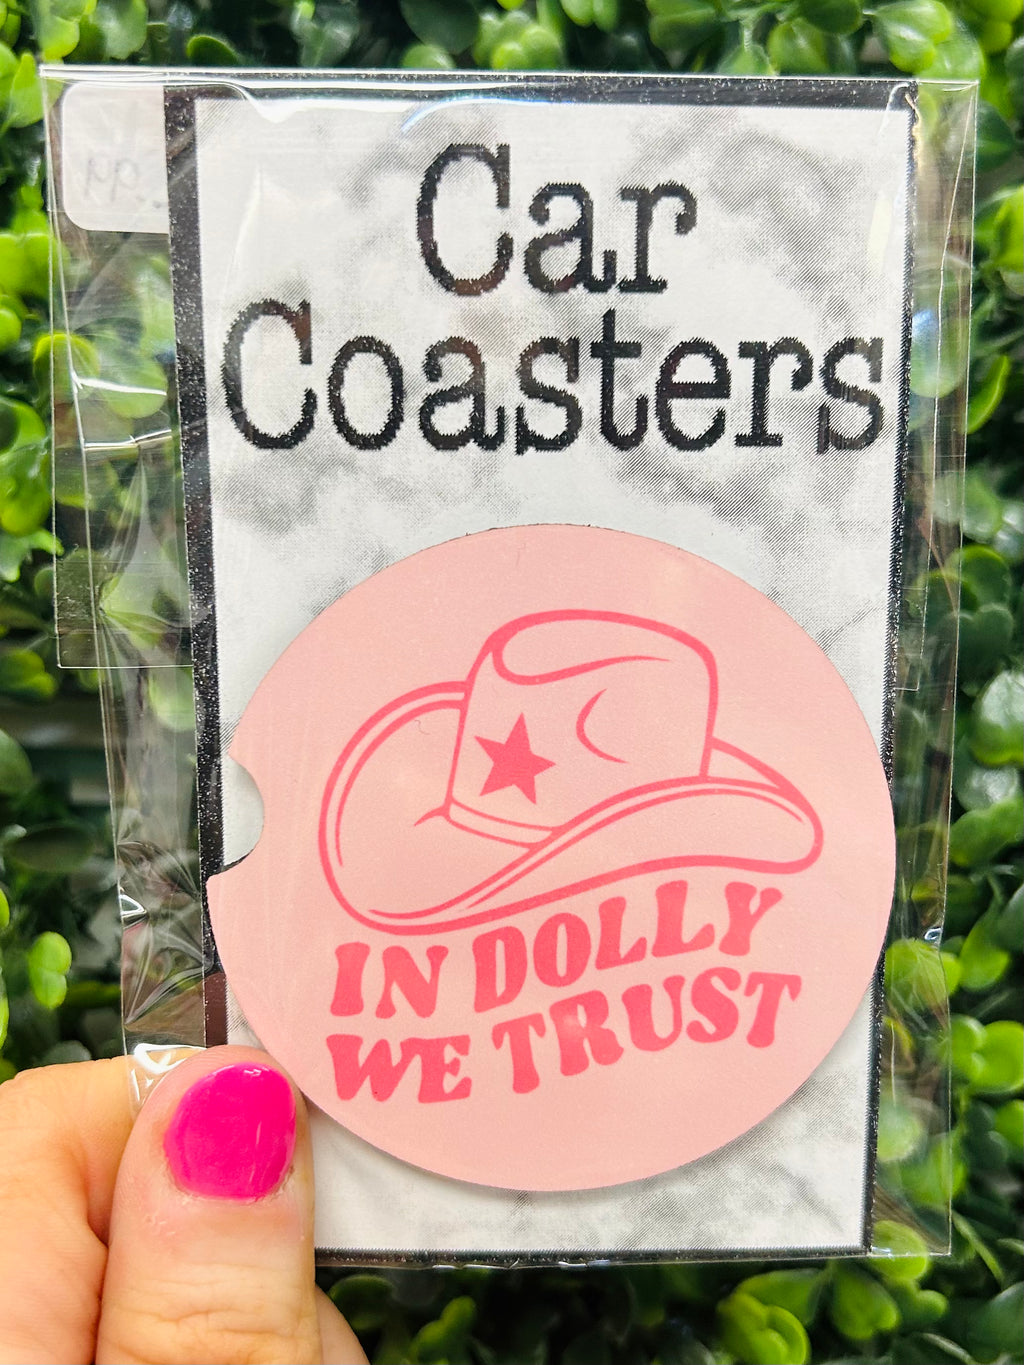 This quirky car coaster is a must-have for a Dolly Parton fan! Featuring the phrase "In Dolly We Trust", it's the perfect gift for your favorite Dolly devotee. Trust us, they'll be 'dollying' up their dashboard in no time!